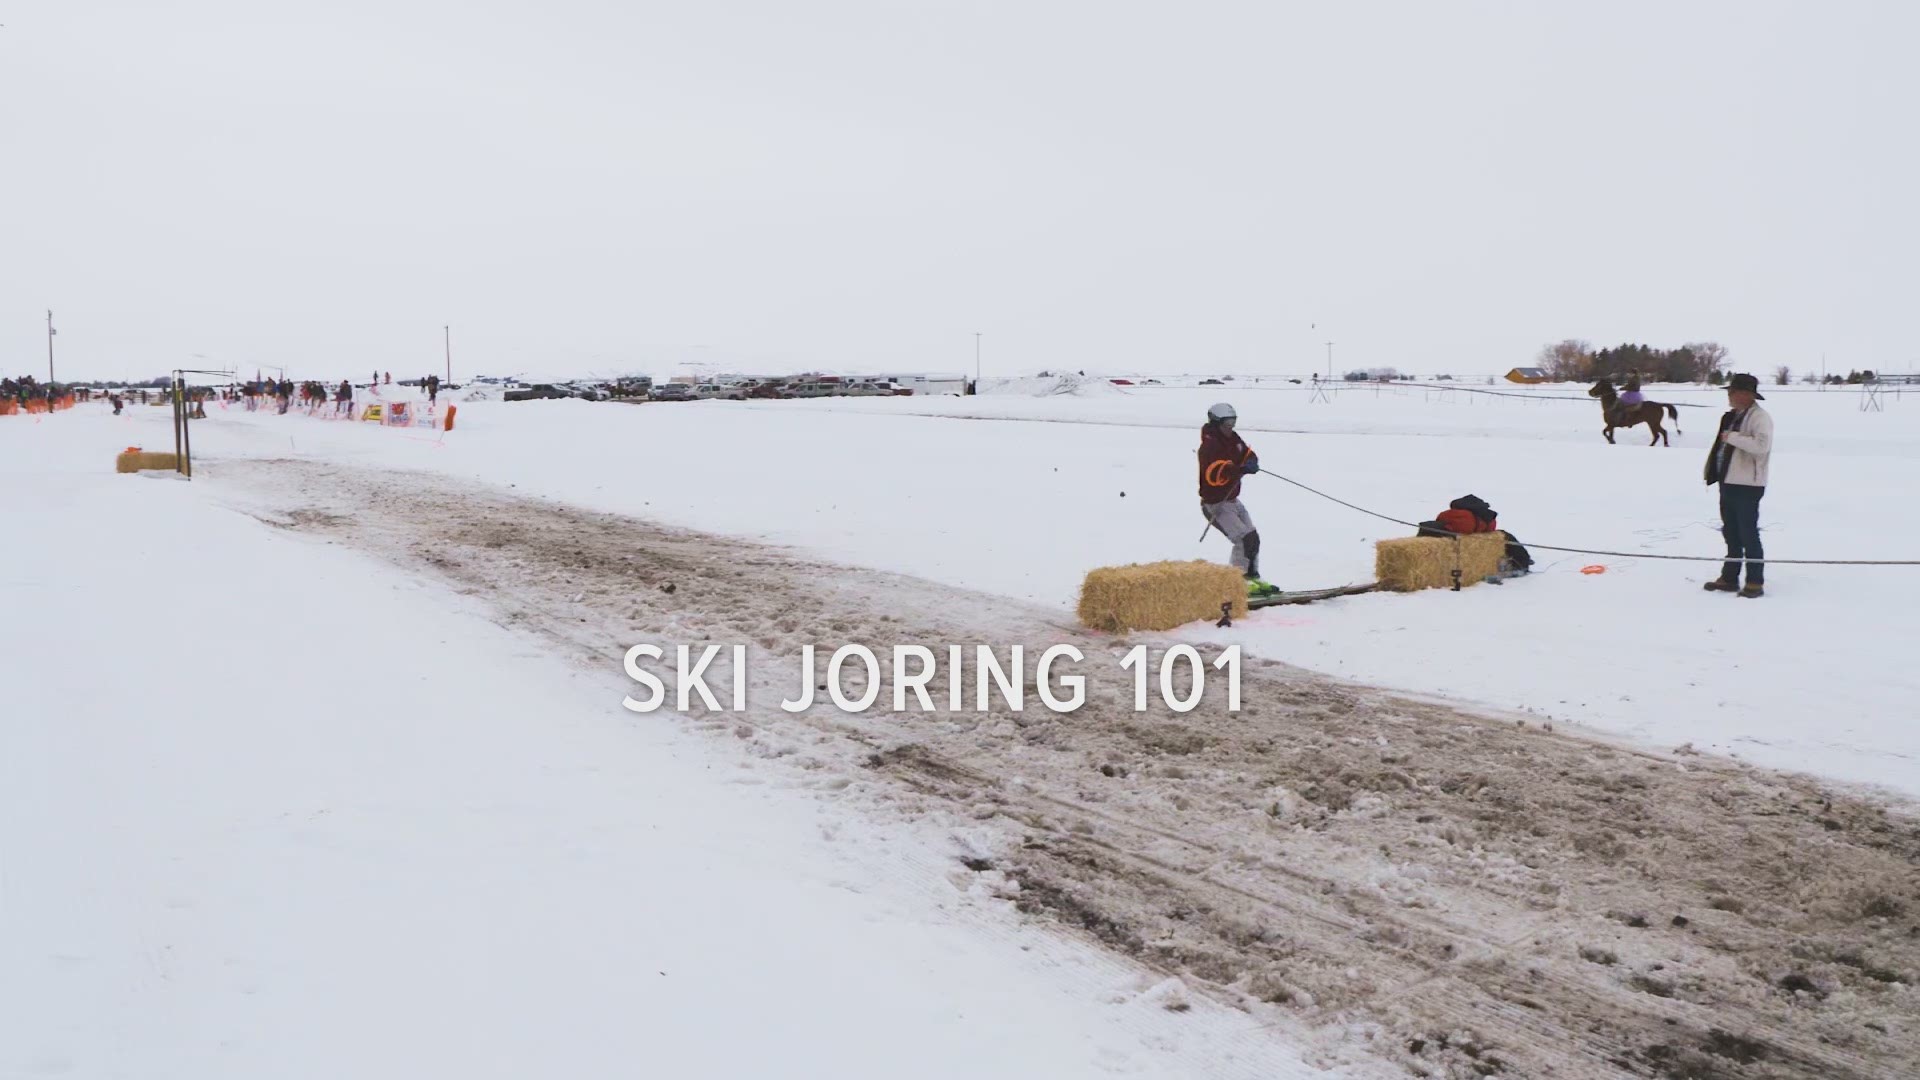 Equal parts raucous entertainment and serious athletic endeavor, skijoring —  where a rider on horseback pulls a skier through an obstacle course —  is perhaps winter's wildest sport.